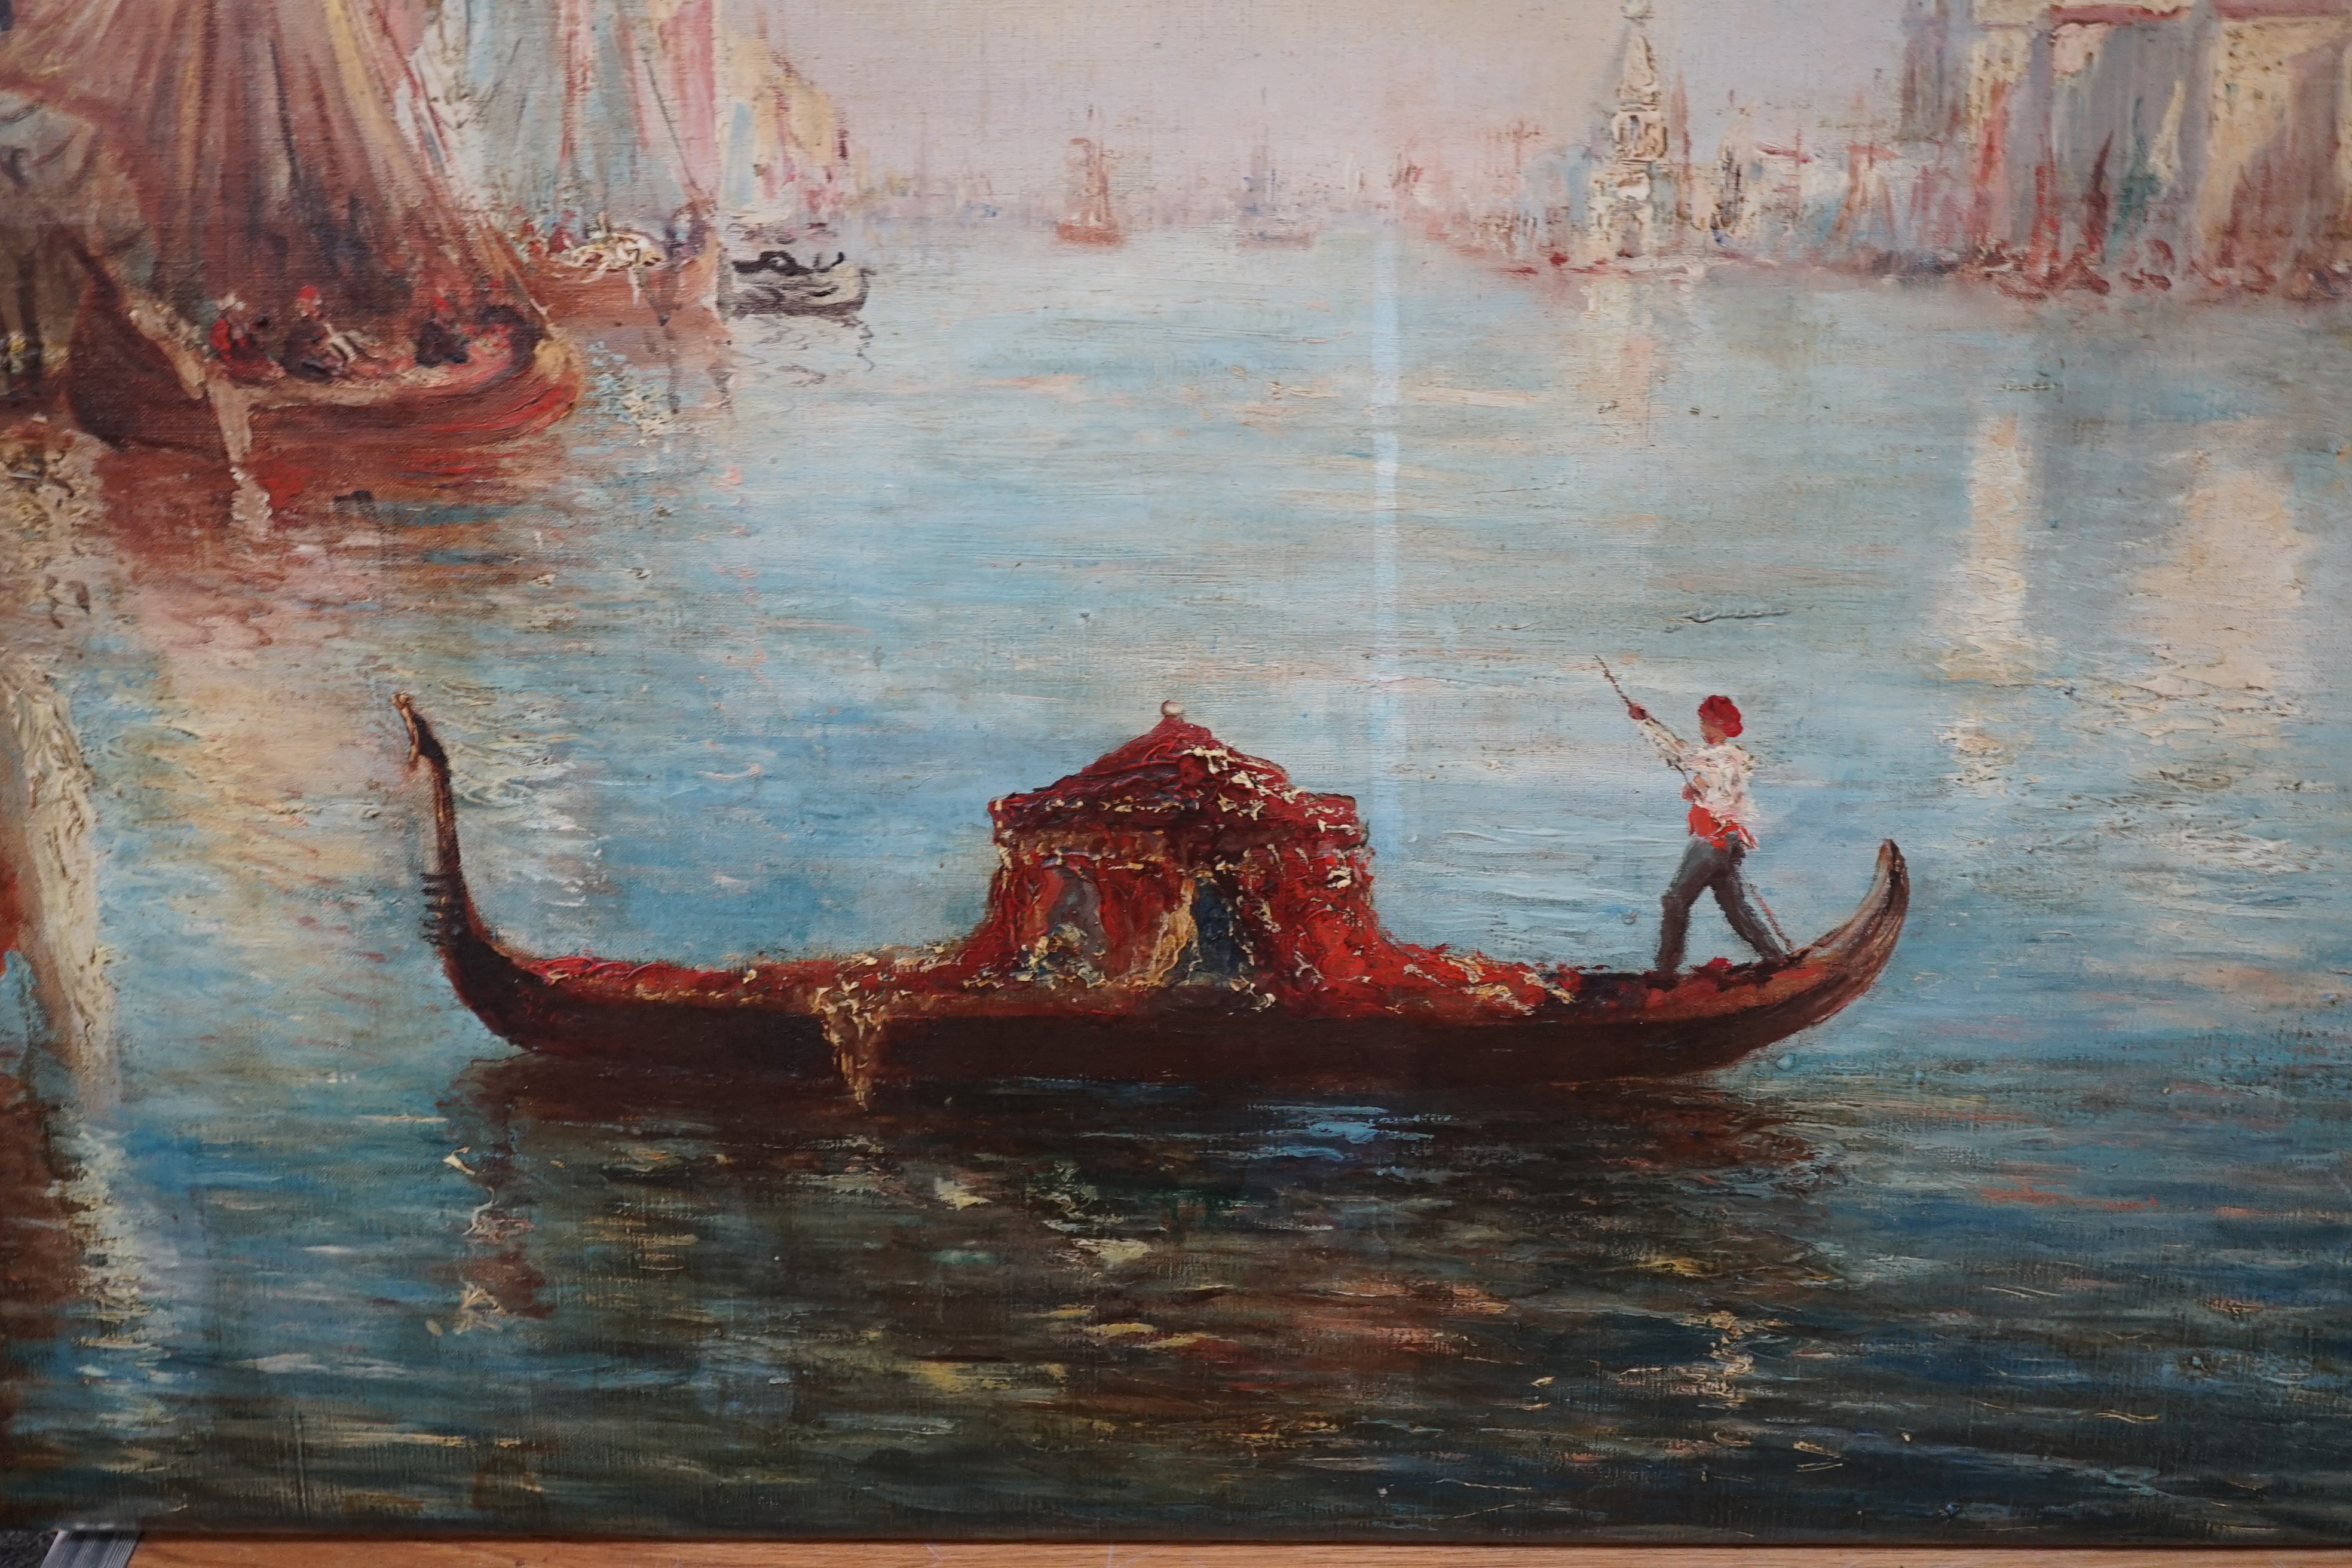 T. Jarazynski (19th.C), oil on canvas, Venetian scene, signed, unframed, 66 x 112cm. Condition - poor to fair, surface dirt and scuffs